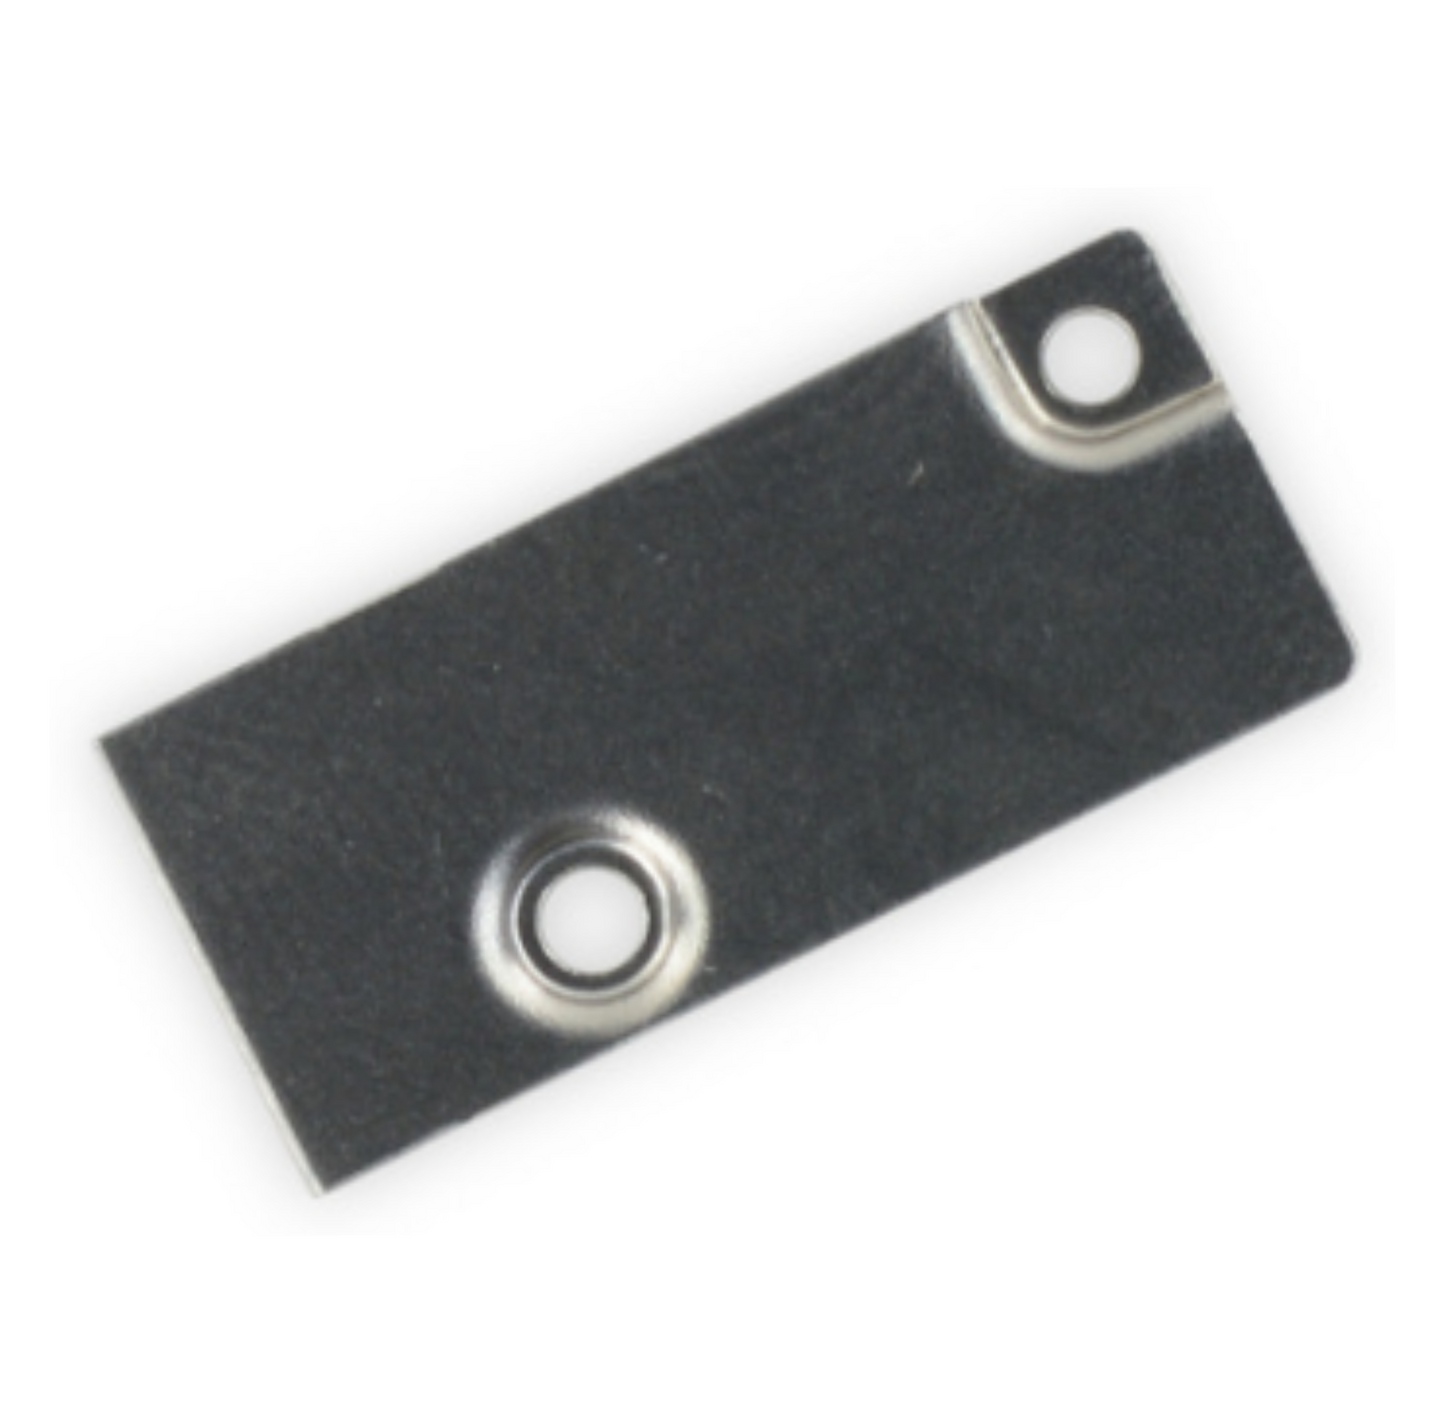 iPhone 6s Plus Battery Connector Fastening Plate